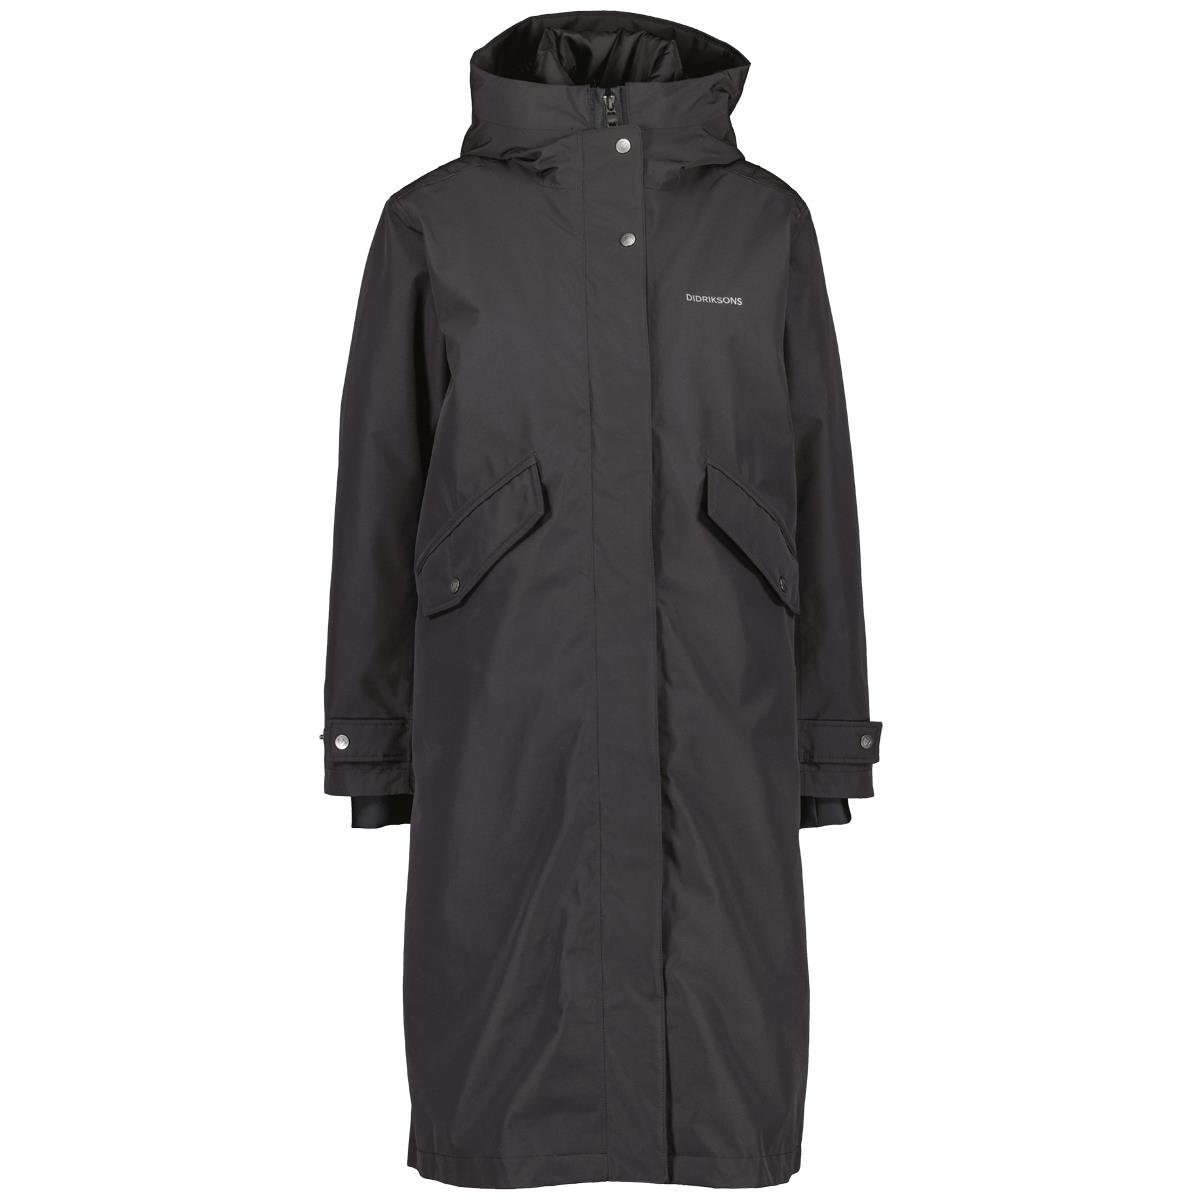 Didriksons Womans Mia Parka Jacket Questions & Answers